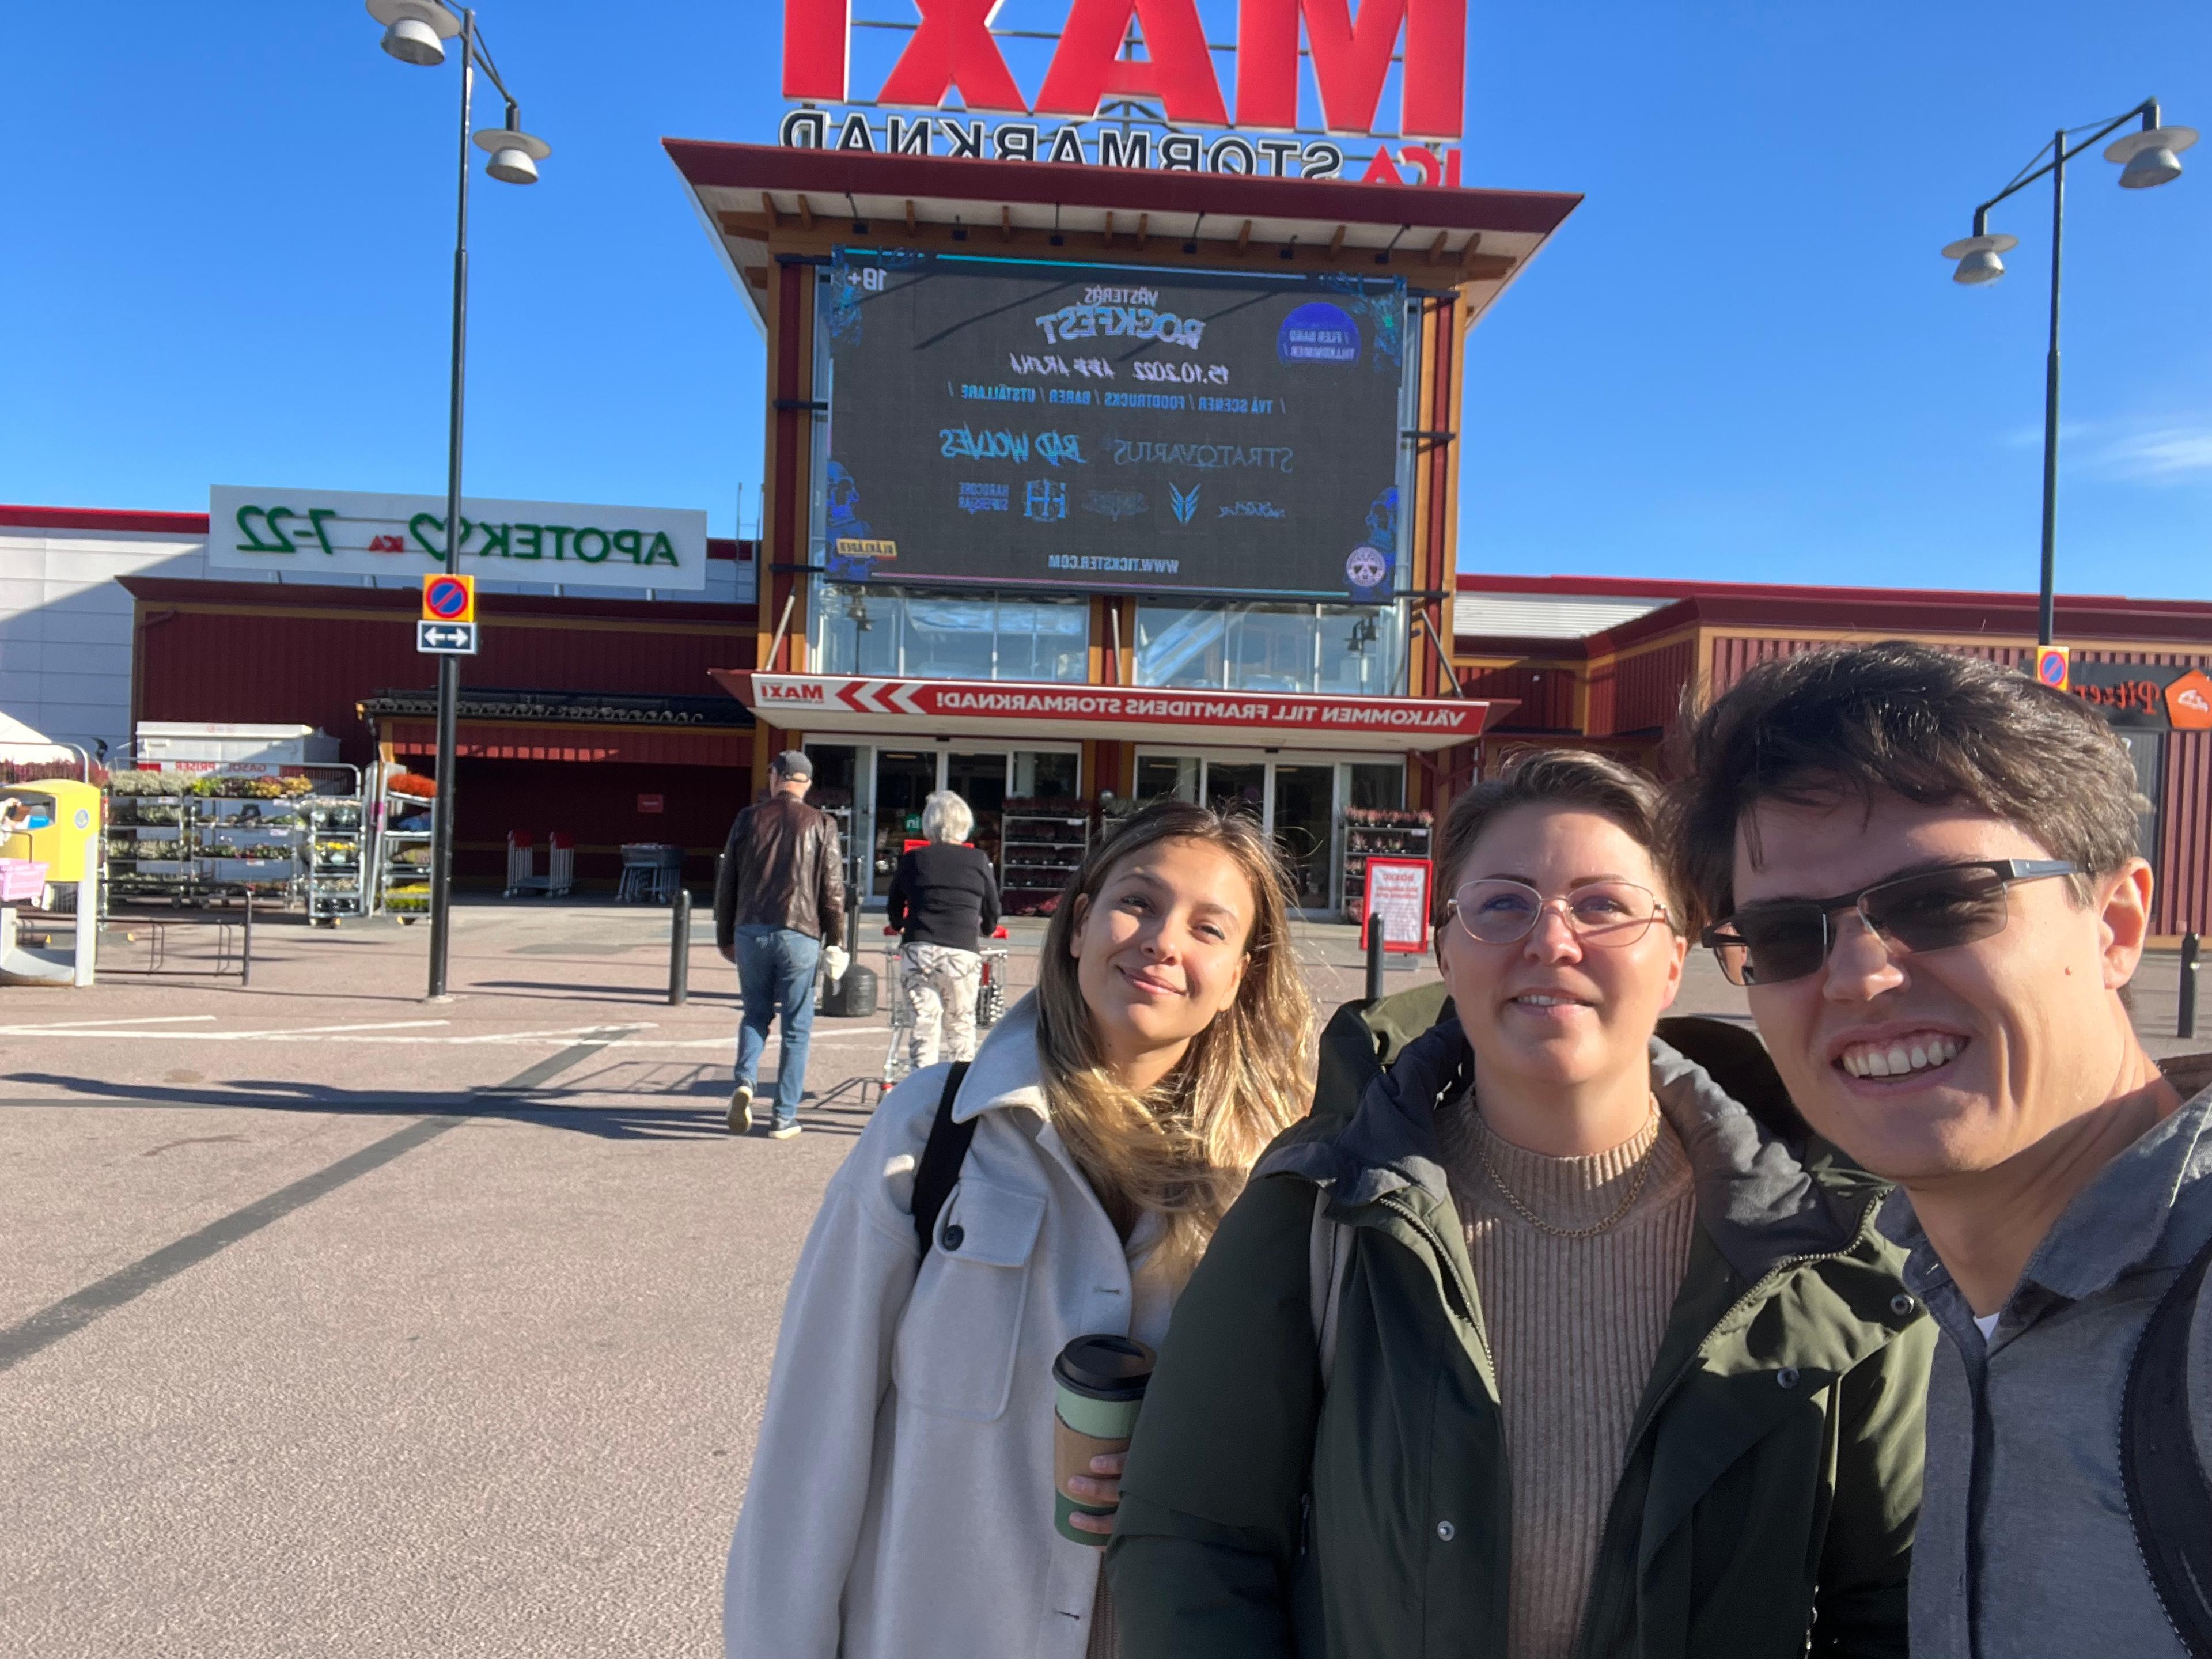 Three people are smiling at the camera in front of a cinema entrance on a sunny day.